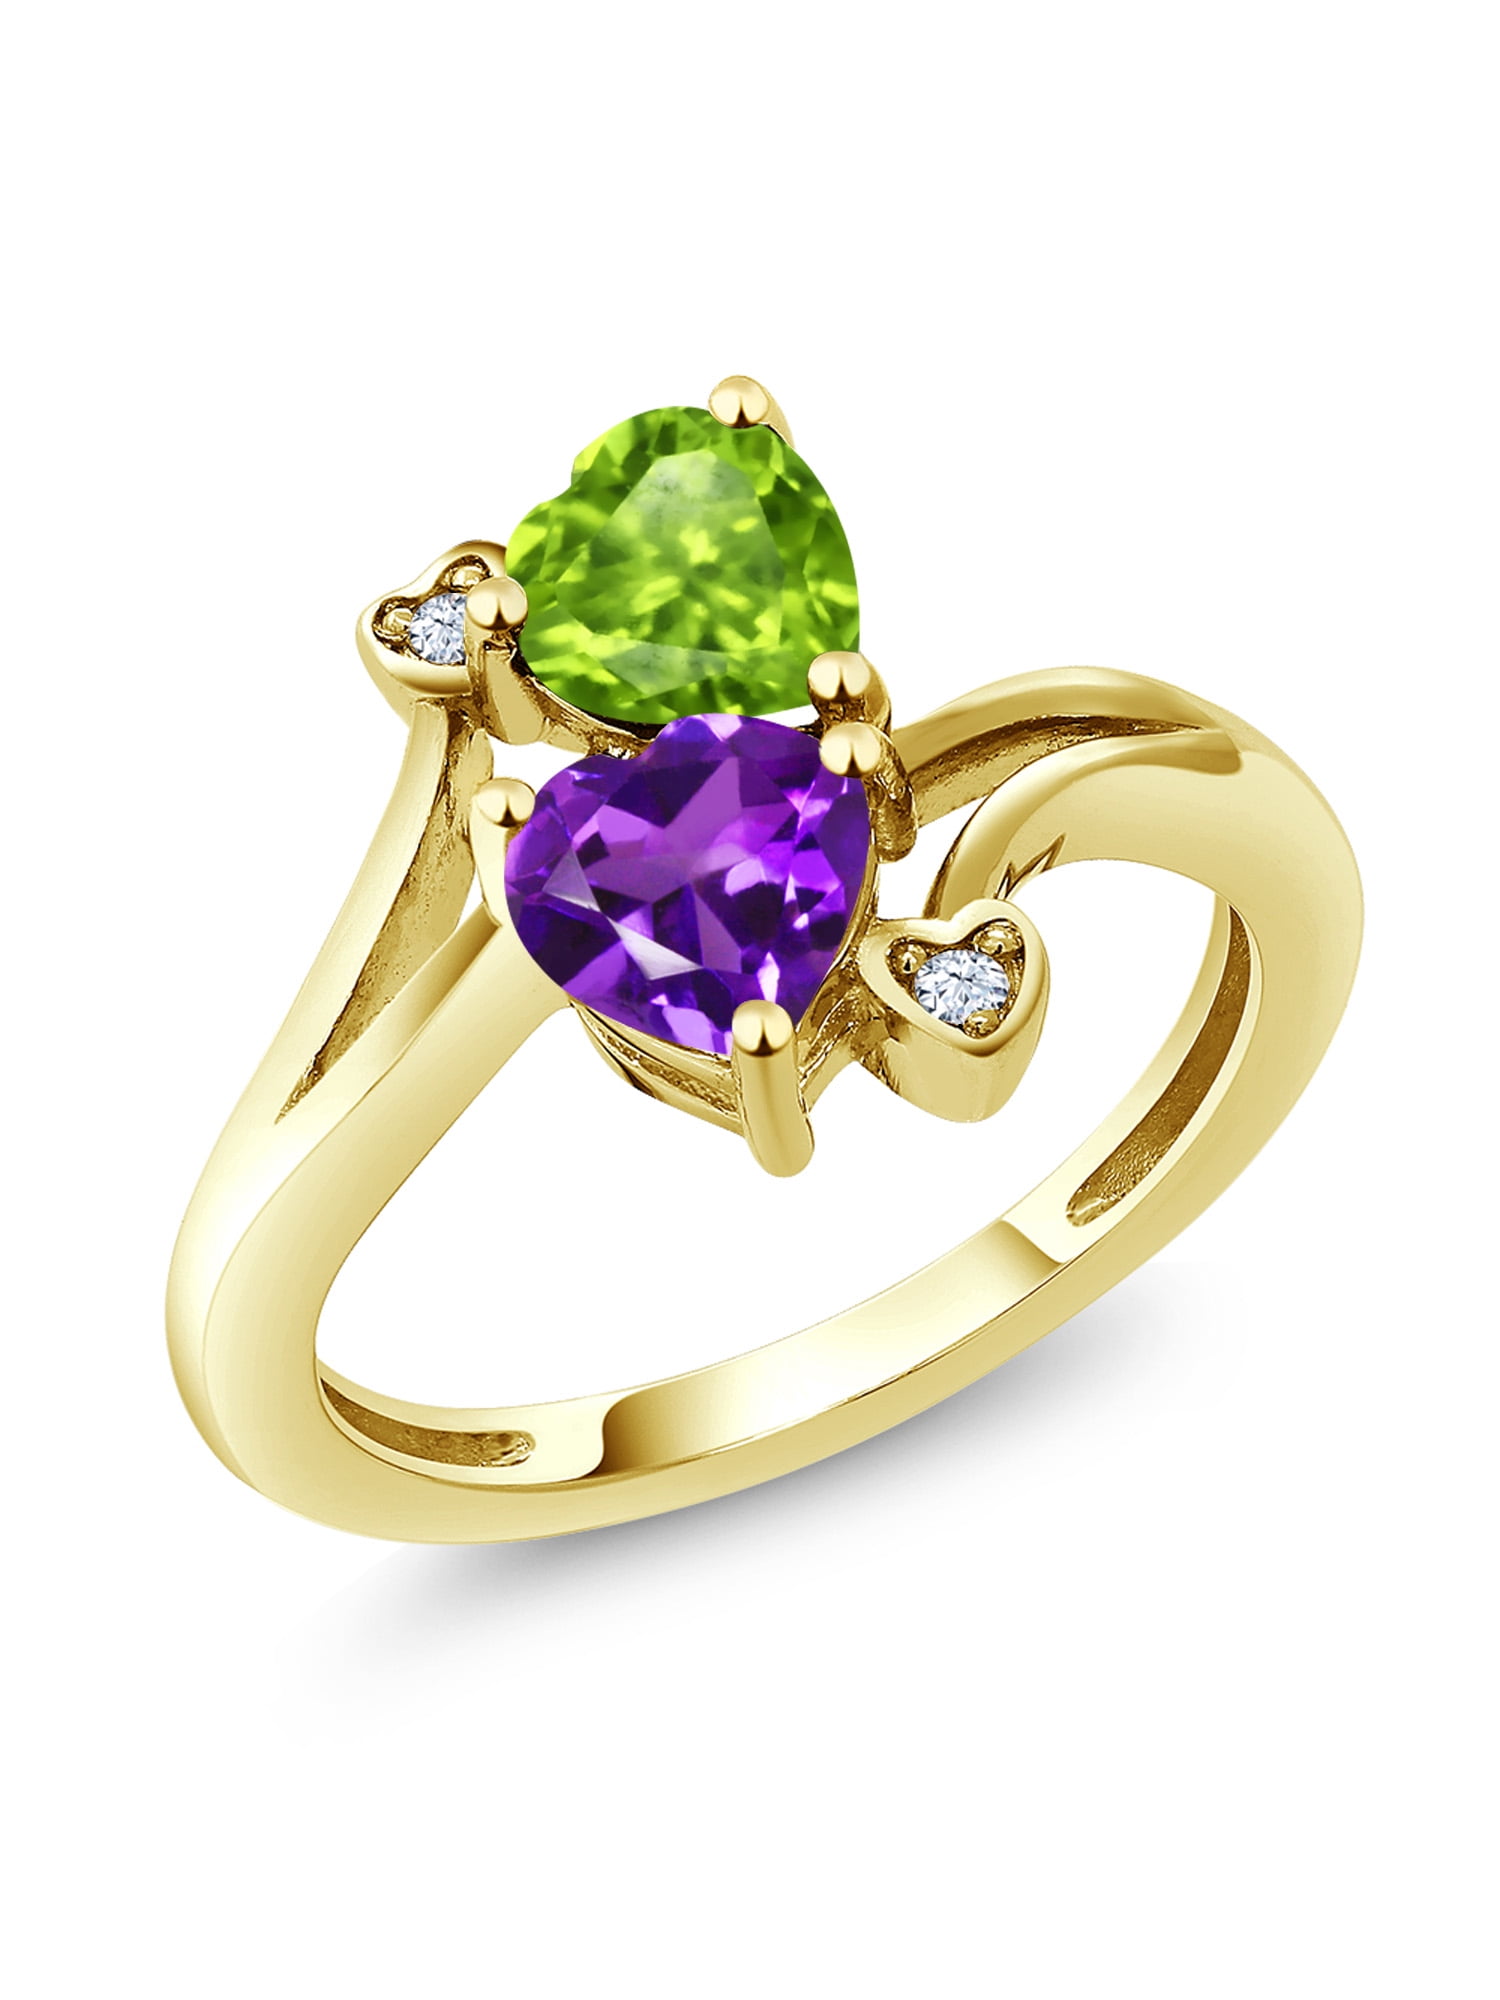 Gem Stone King 10K Yellow Gold Purple Amethyst and Green Peridot Women Ring  (1.51 Ct Heart Shape, Gemstone Birthstone, Available in Size 5, 6, 7, 8, 